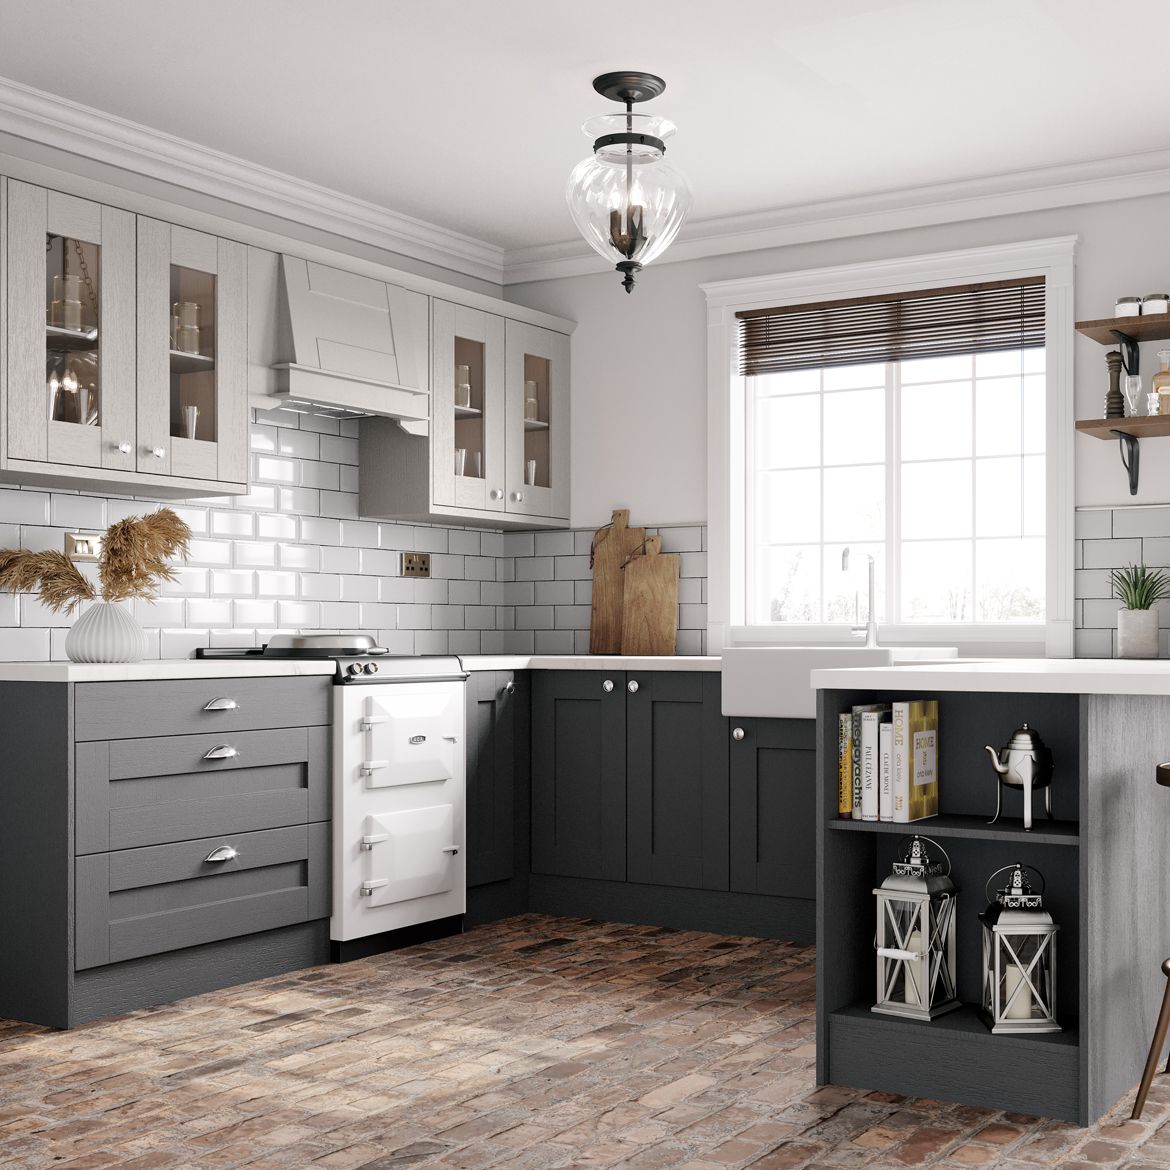 Classic lines and versatile colours: Our essential kitchen designs that will stand the test of time